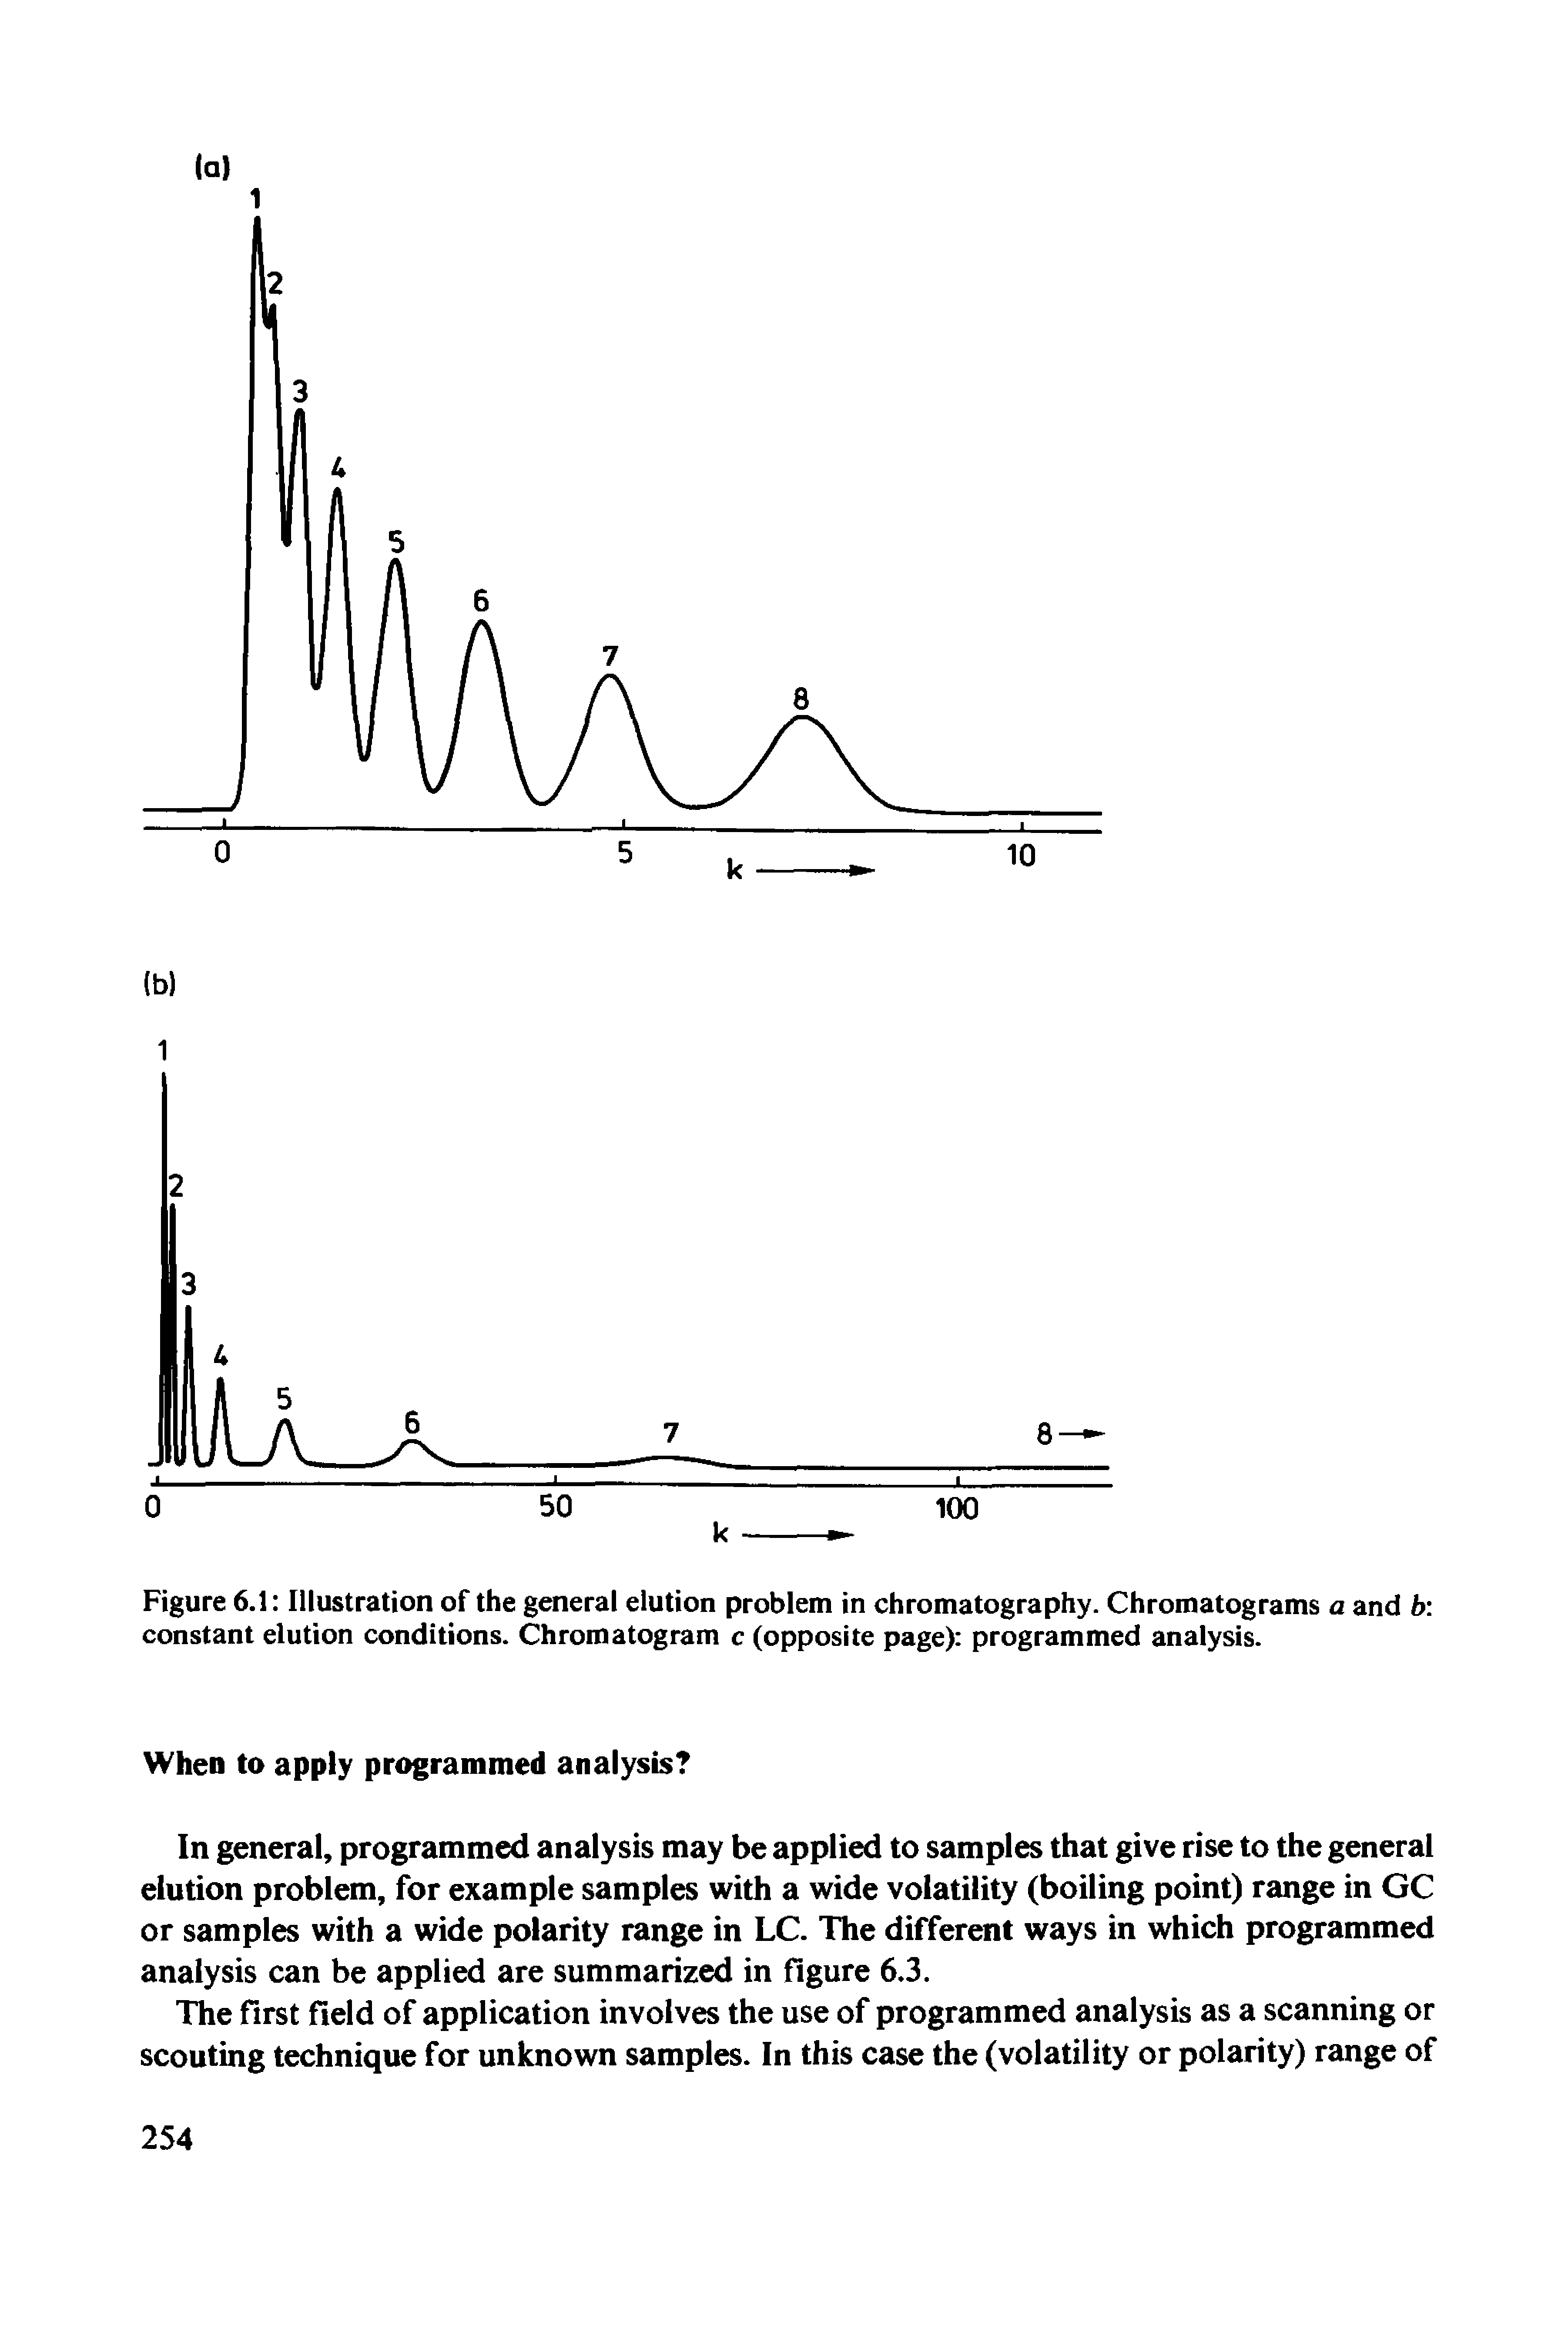 Figure 6.1 Illustration of the general elution problem in chromatography. Chromatograms a and b constant elution conditions. Chromatogram c (opposite page) programmed analysis.